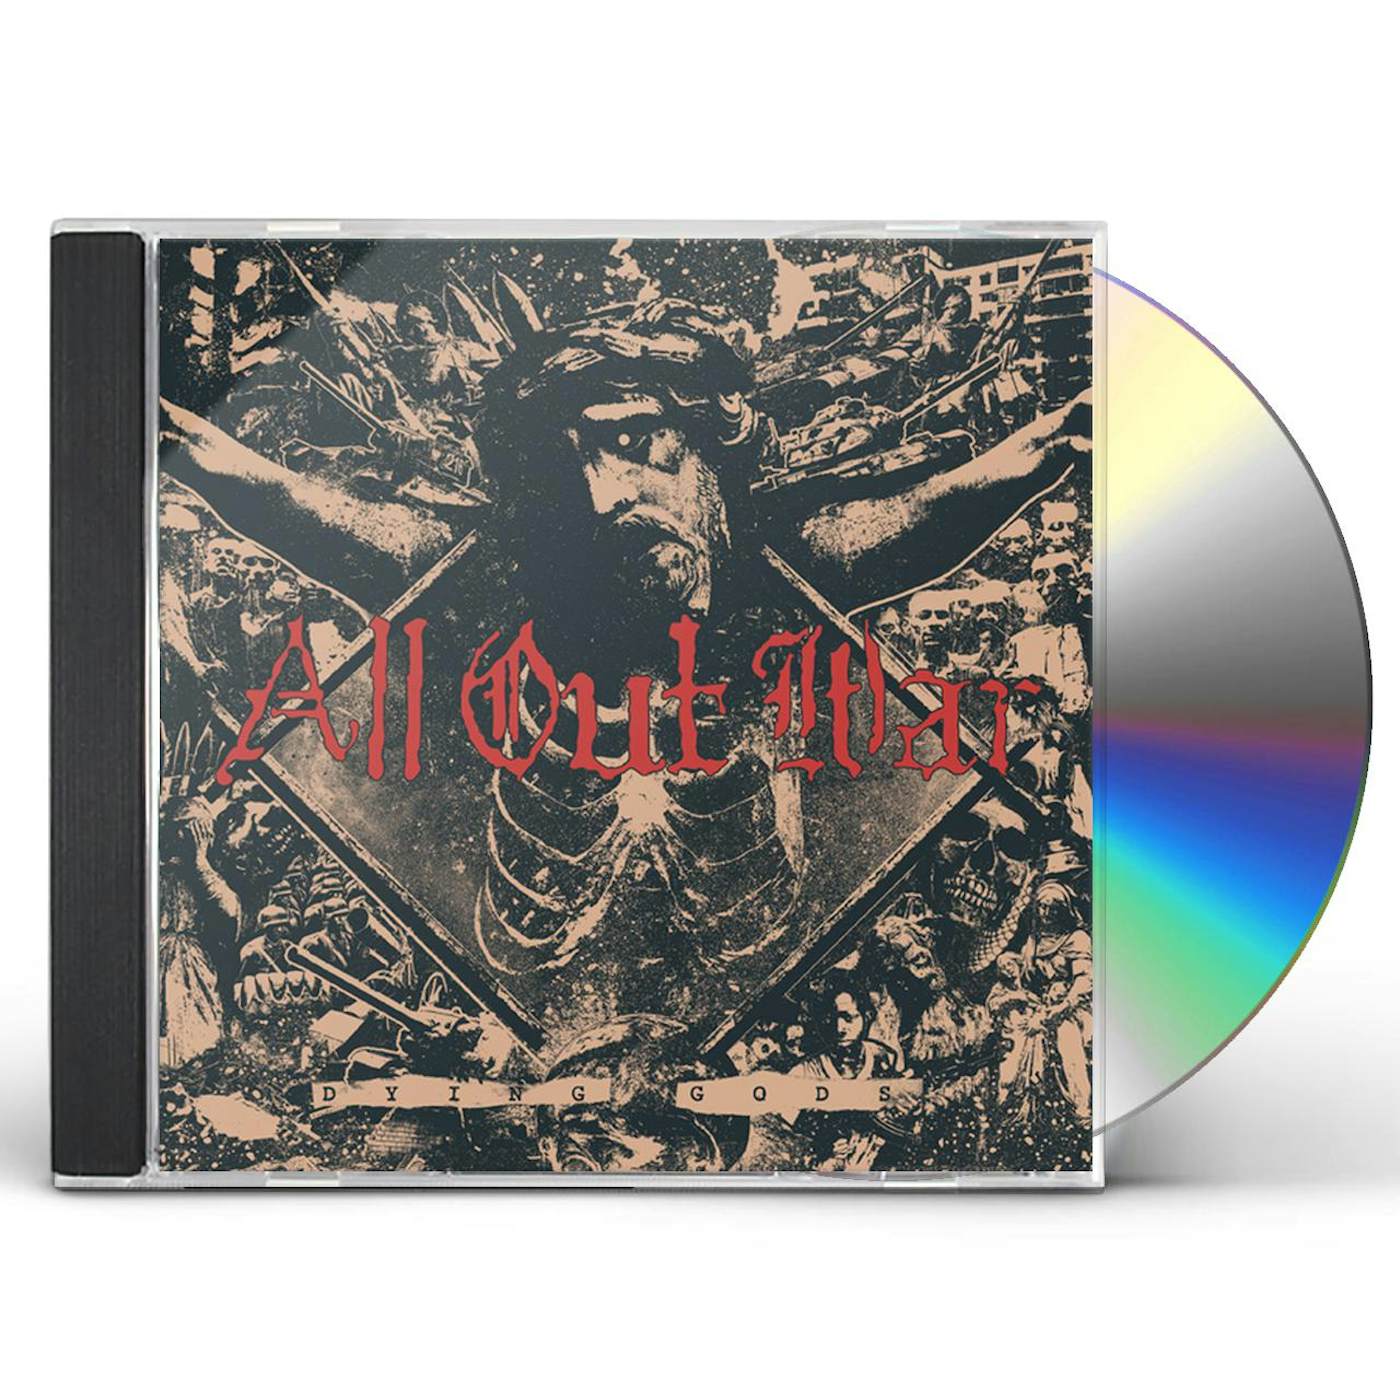 All Out War DYING GODS CD